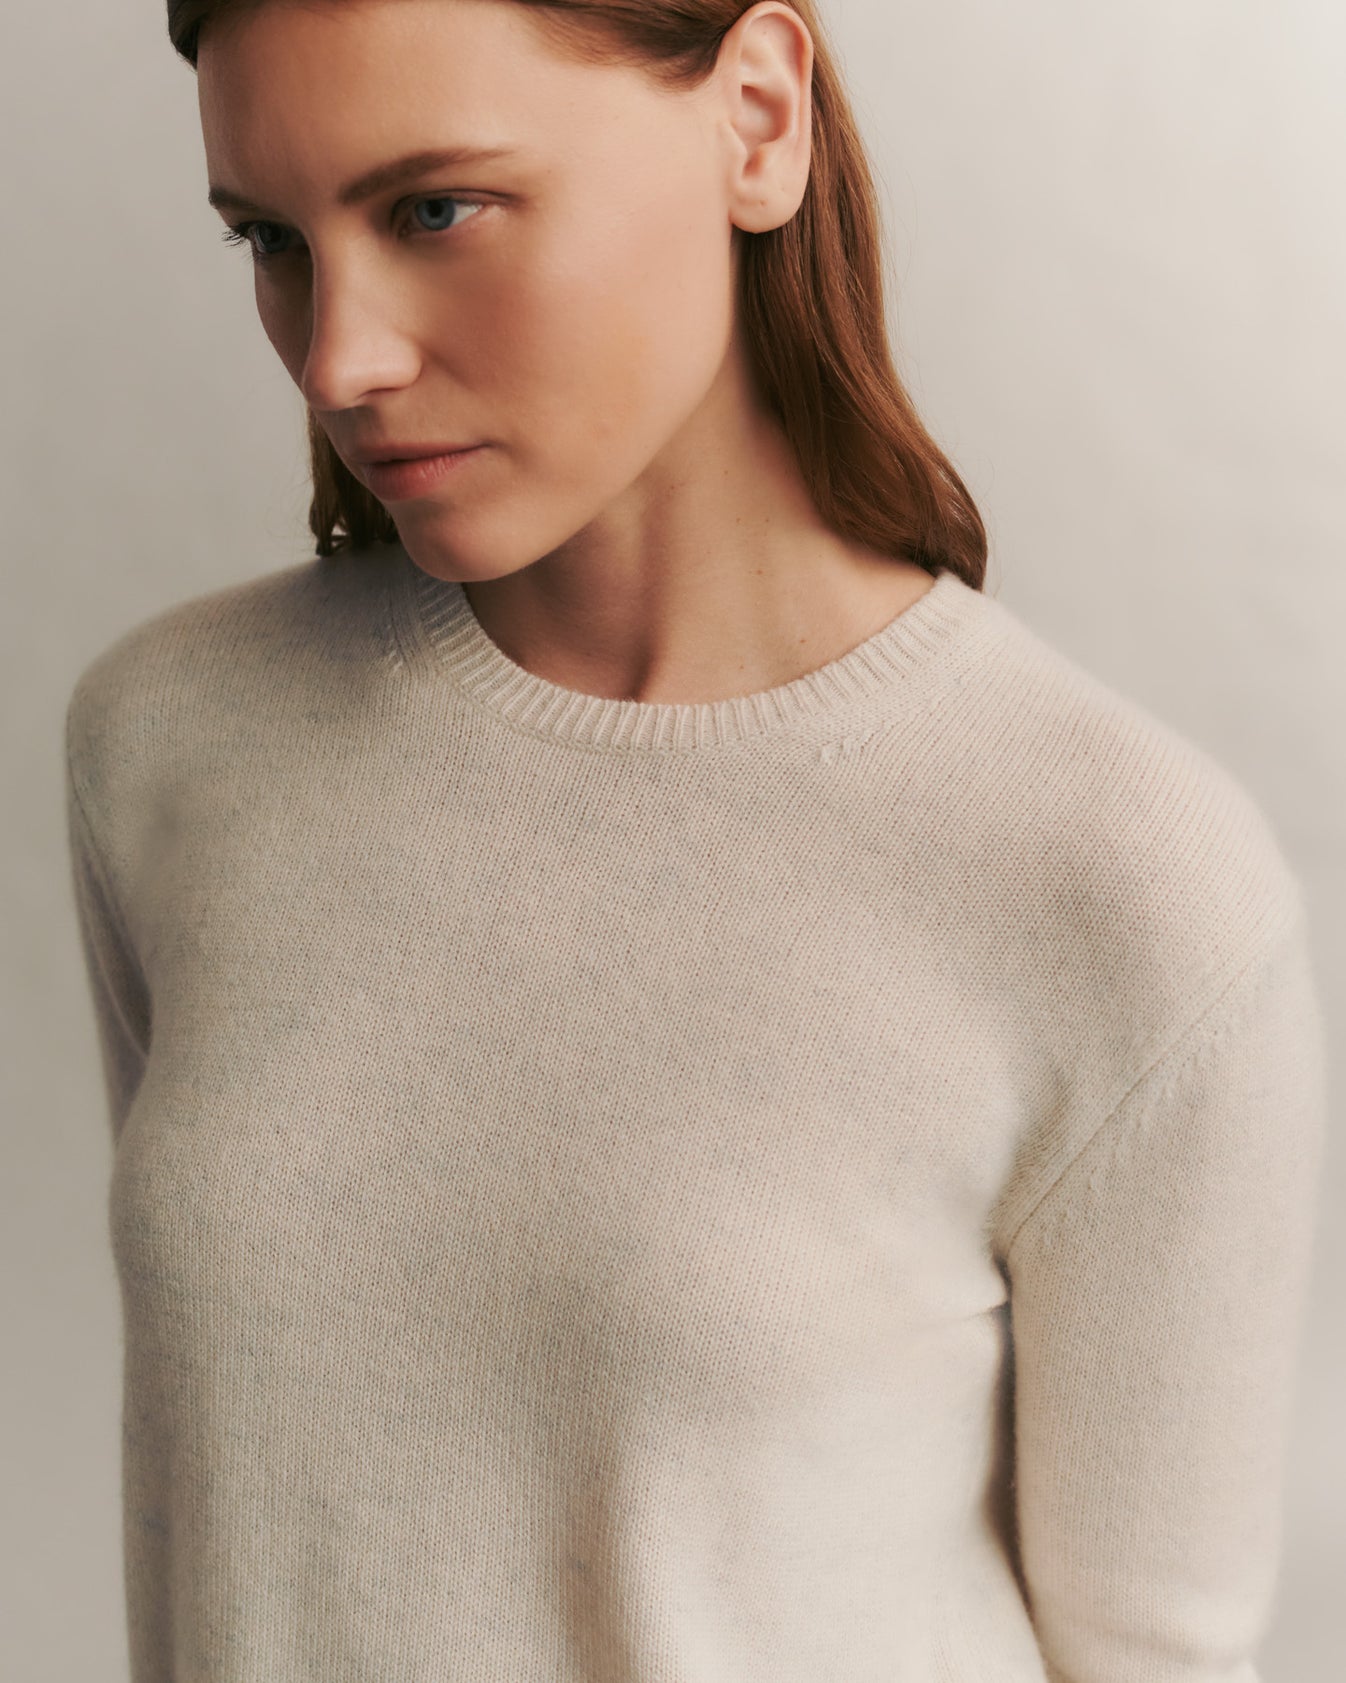 TWP White heather grey Jill Crewneck Sweater in cashmere view 4